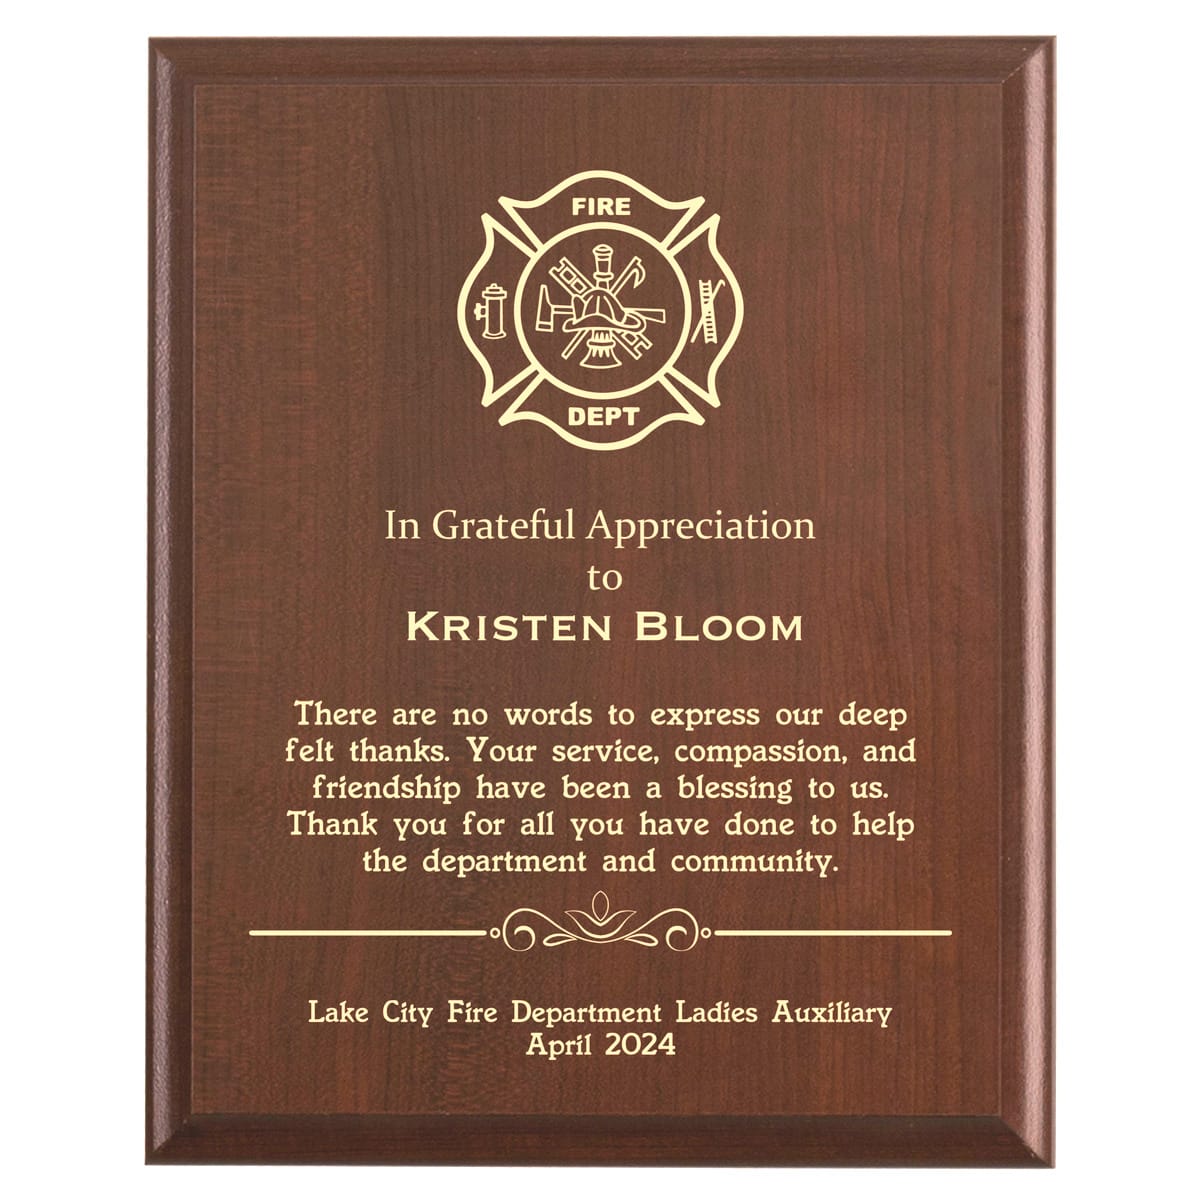 Plaque photo: Ladies Auxiliary Thank You Appreciation Plaque design with free personalization. Wood style finish with customized text.